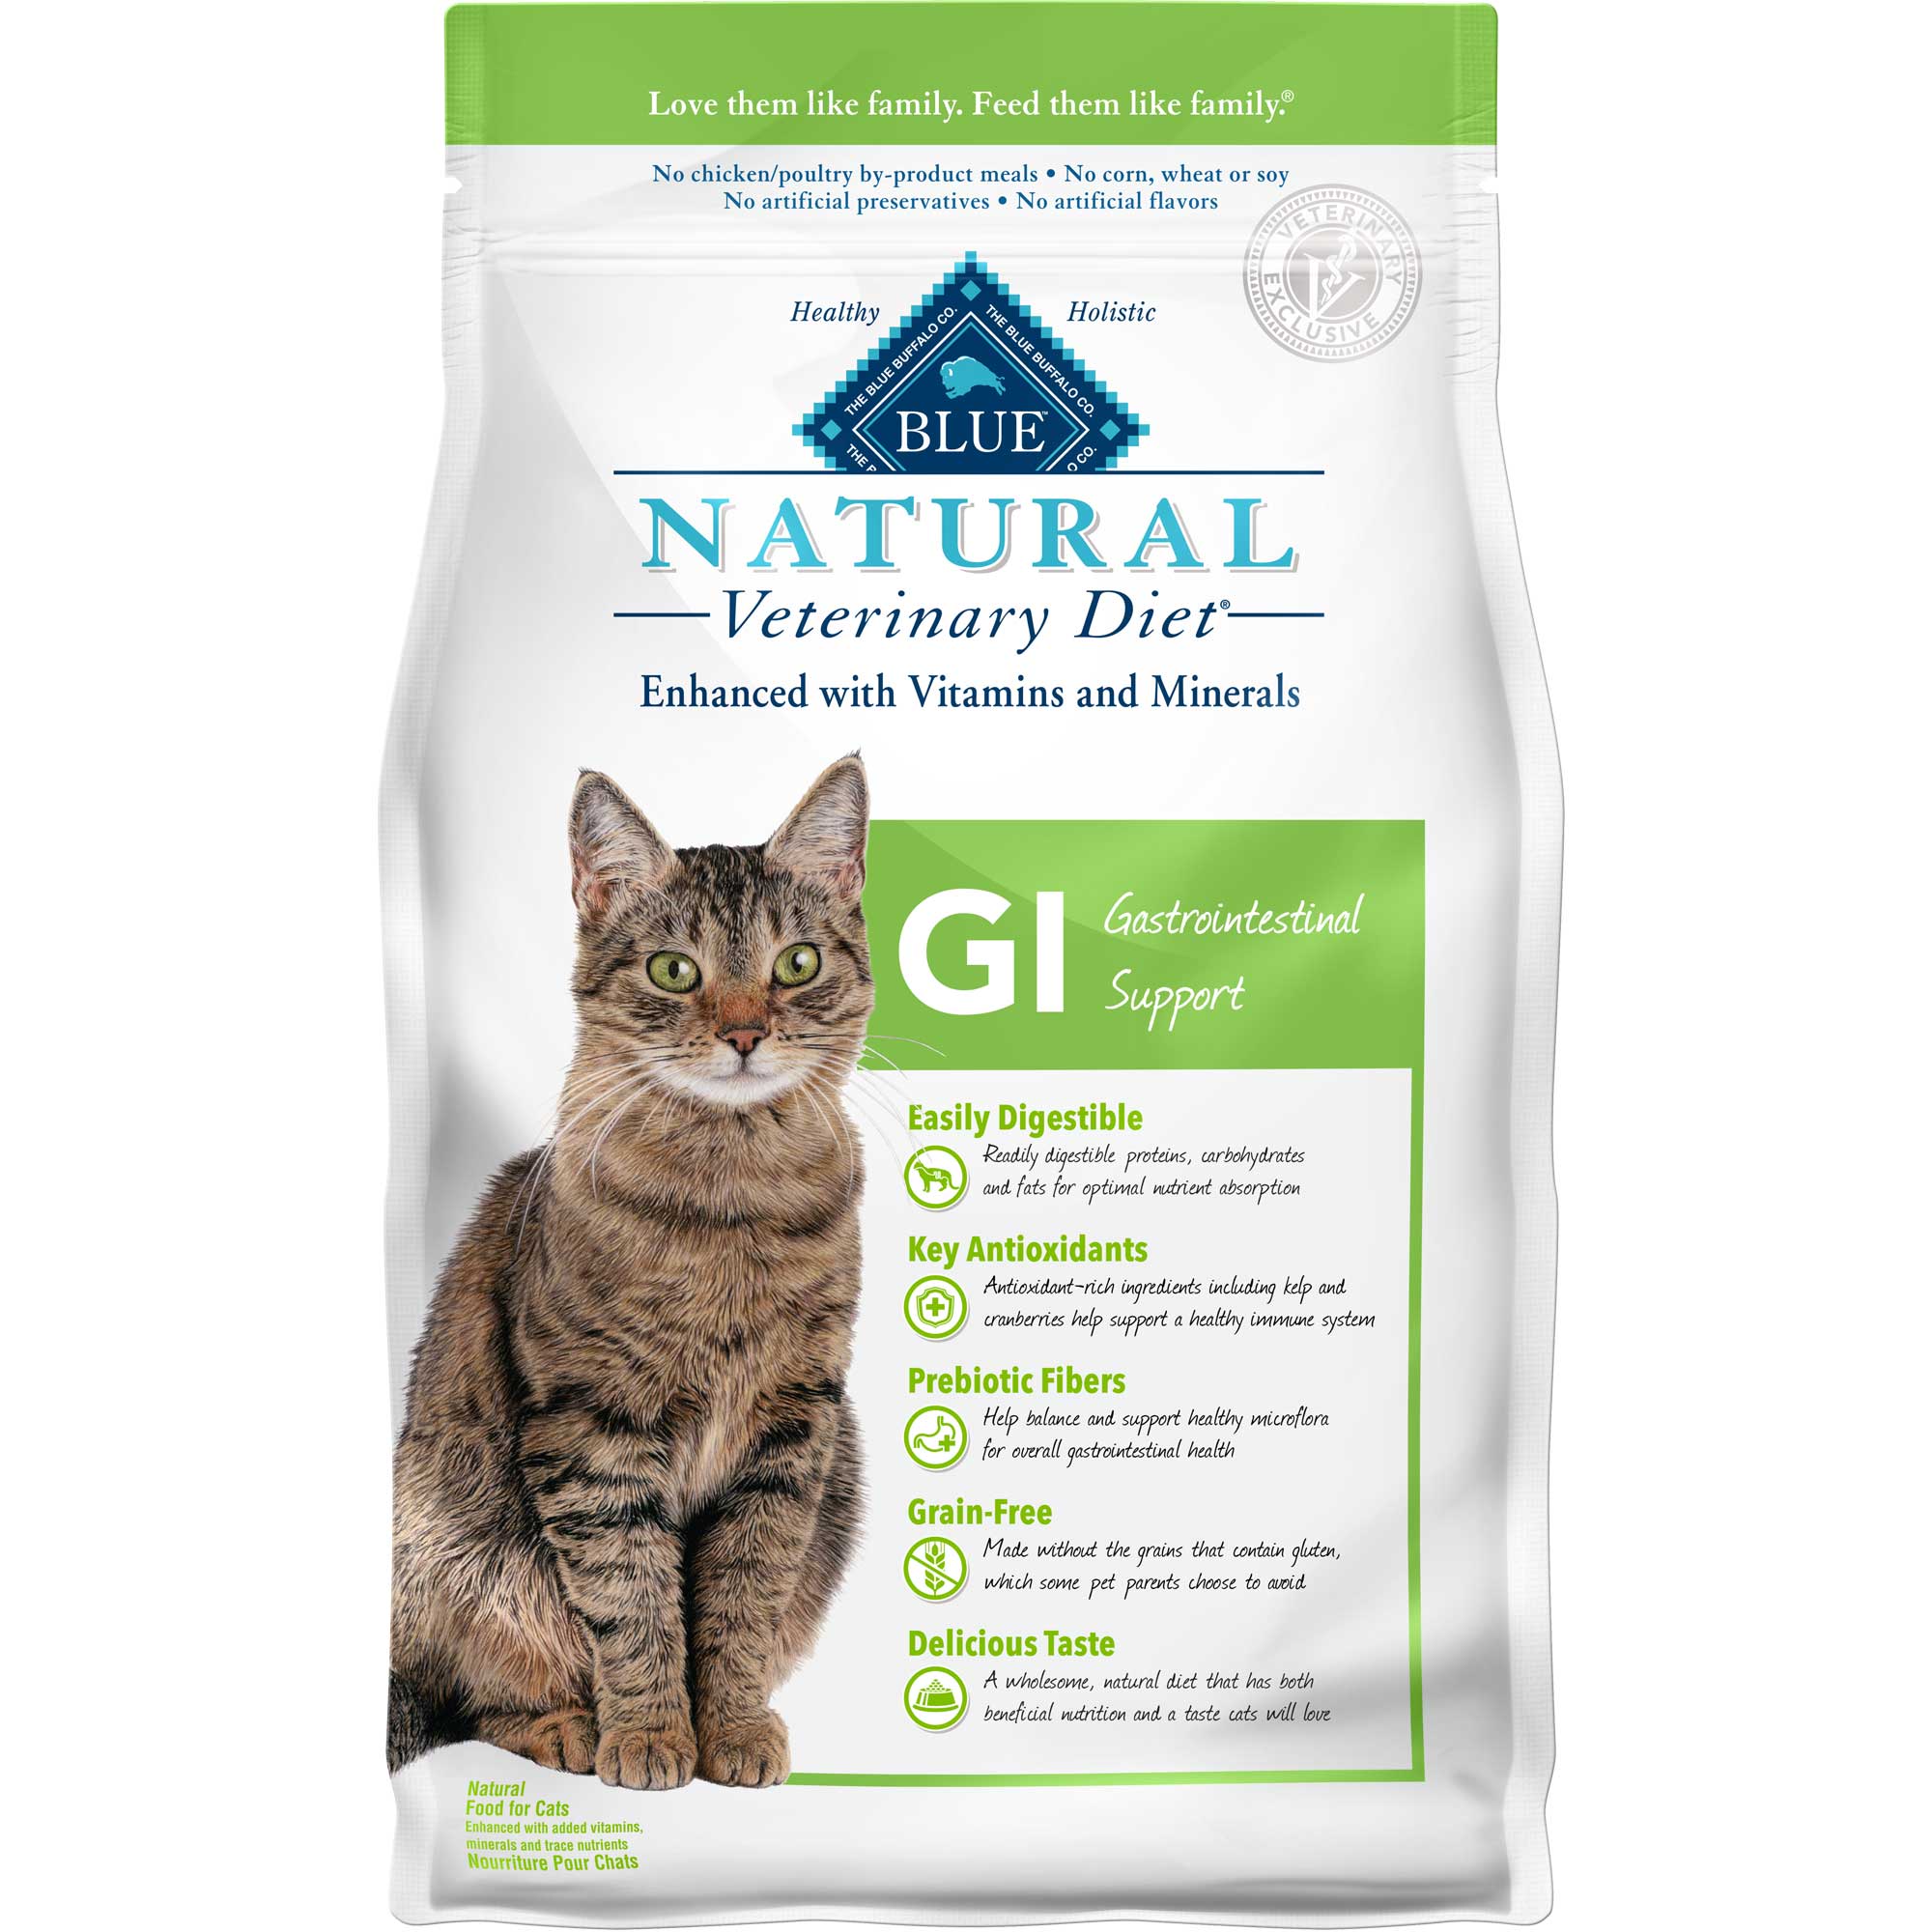 BLUE Natural Veterinary Diet GI Gastrointestinal Support- Dry Cat Food Usage